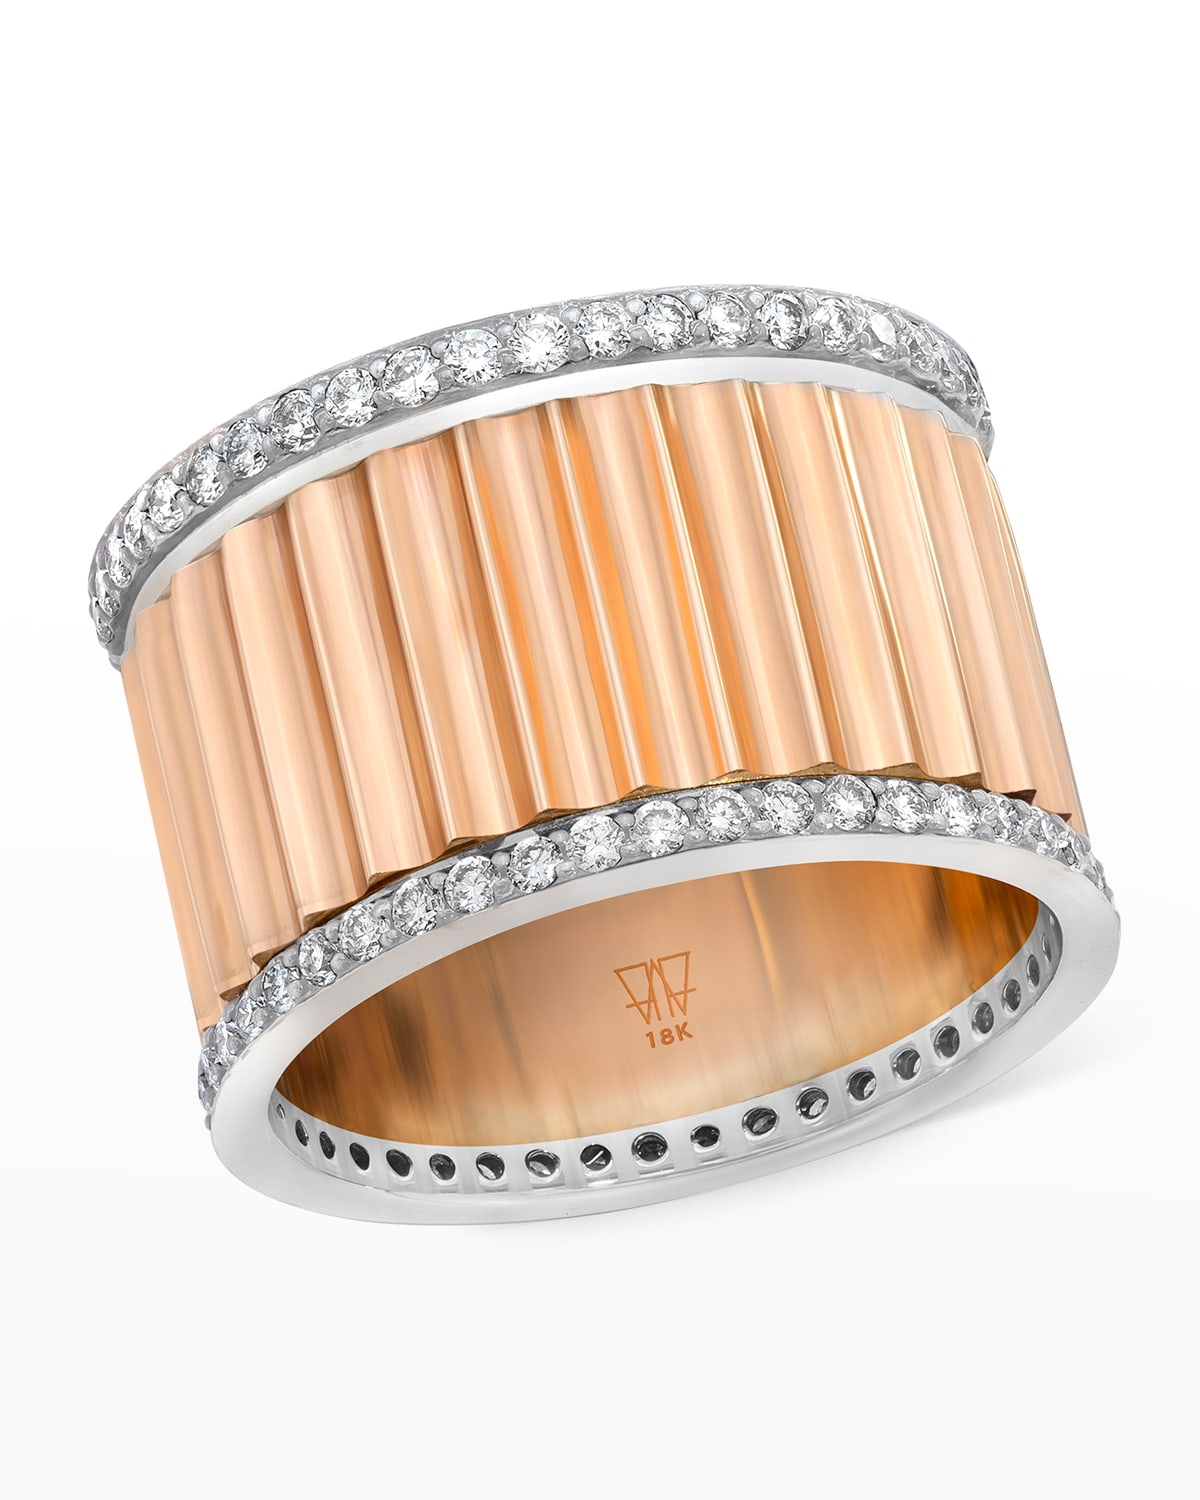 Clive Rose Gold Wide Fluted Band Ring with White Gold and Diamonds